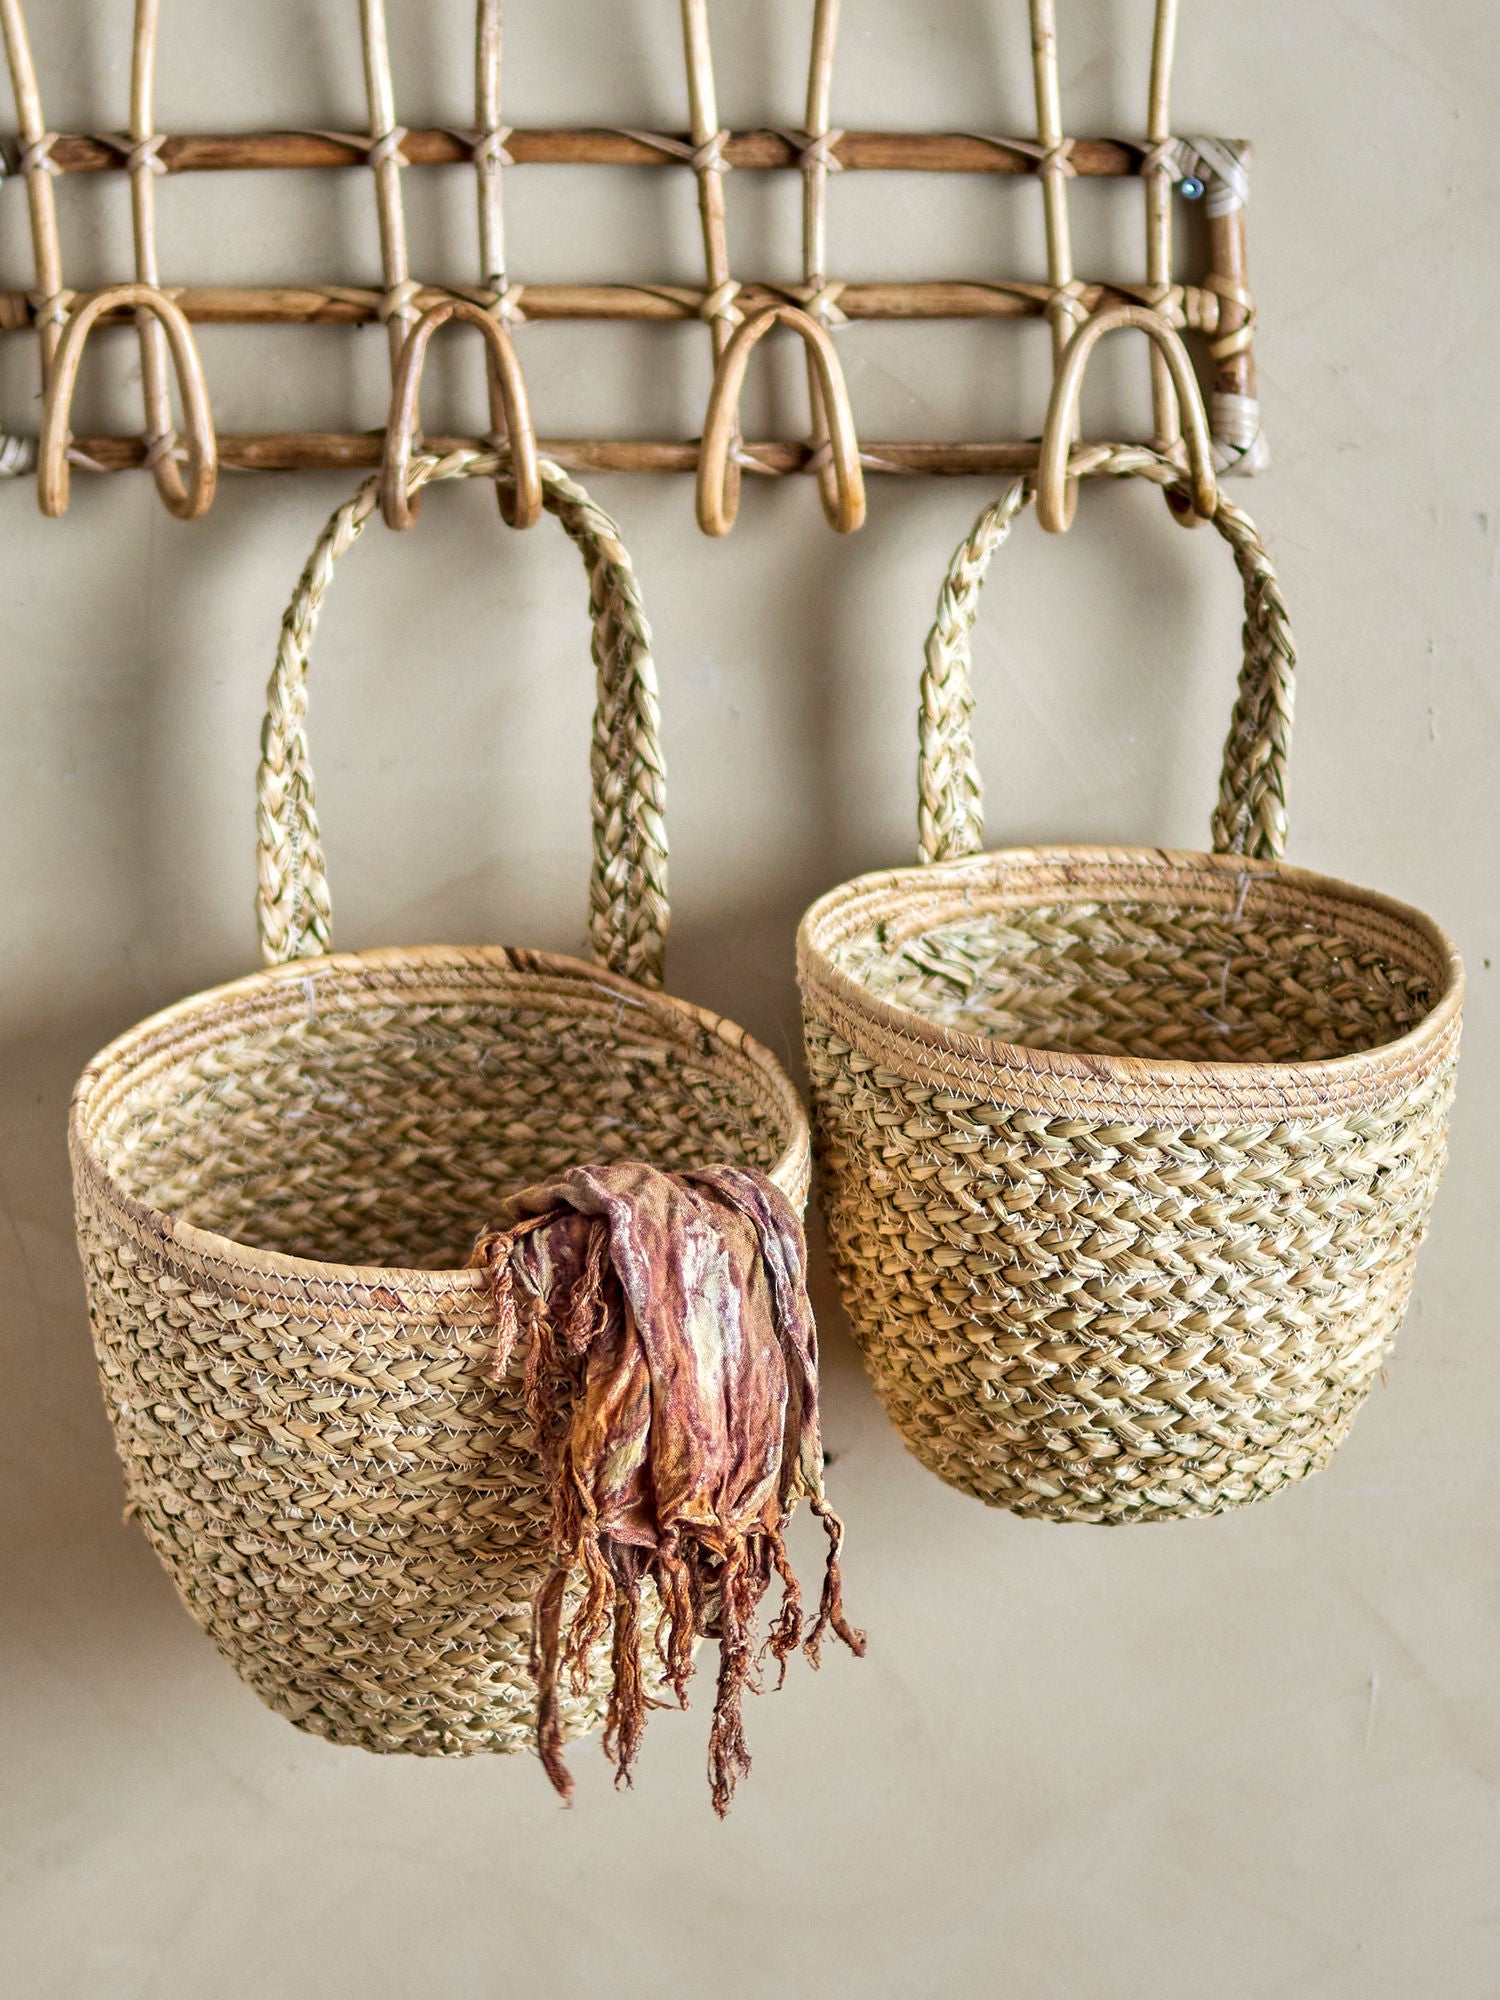 Bloomingville Amia Wall Basket, Nature, Seagrass